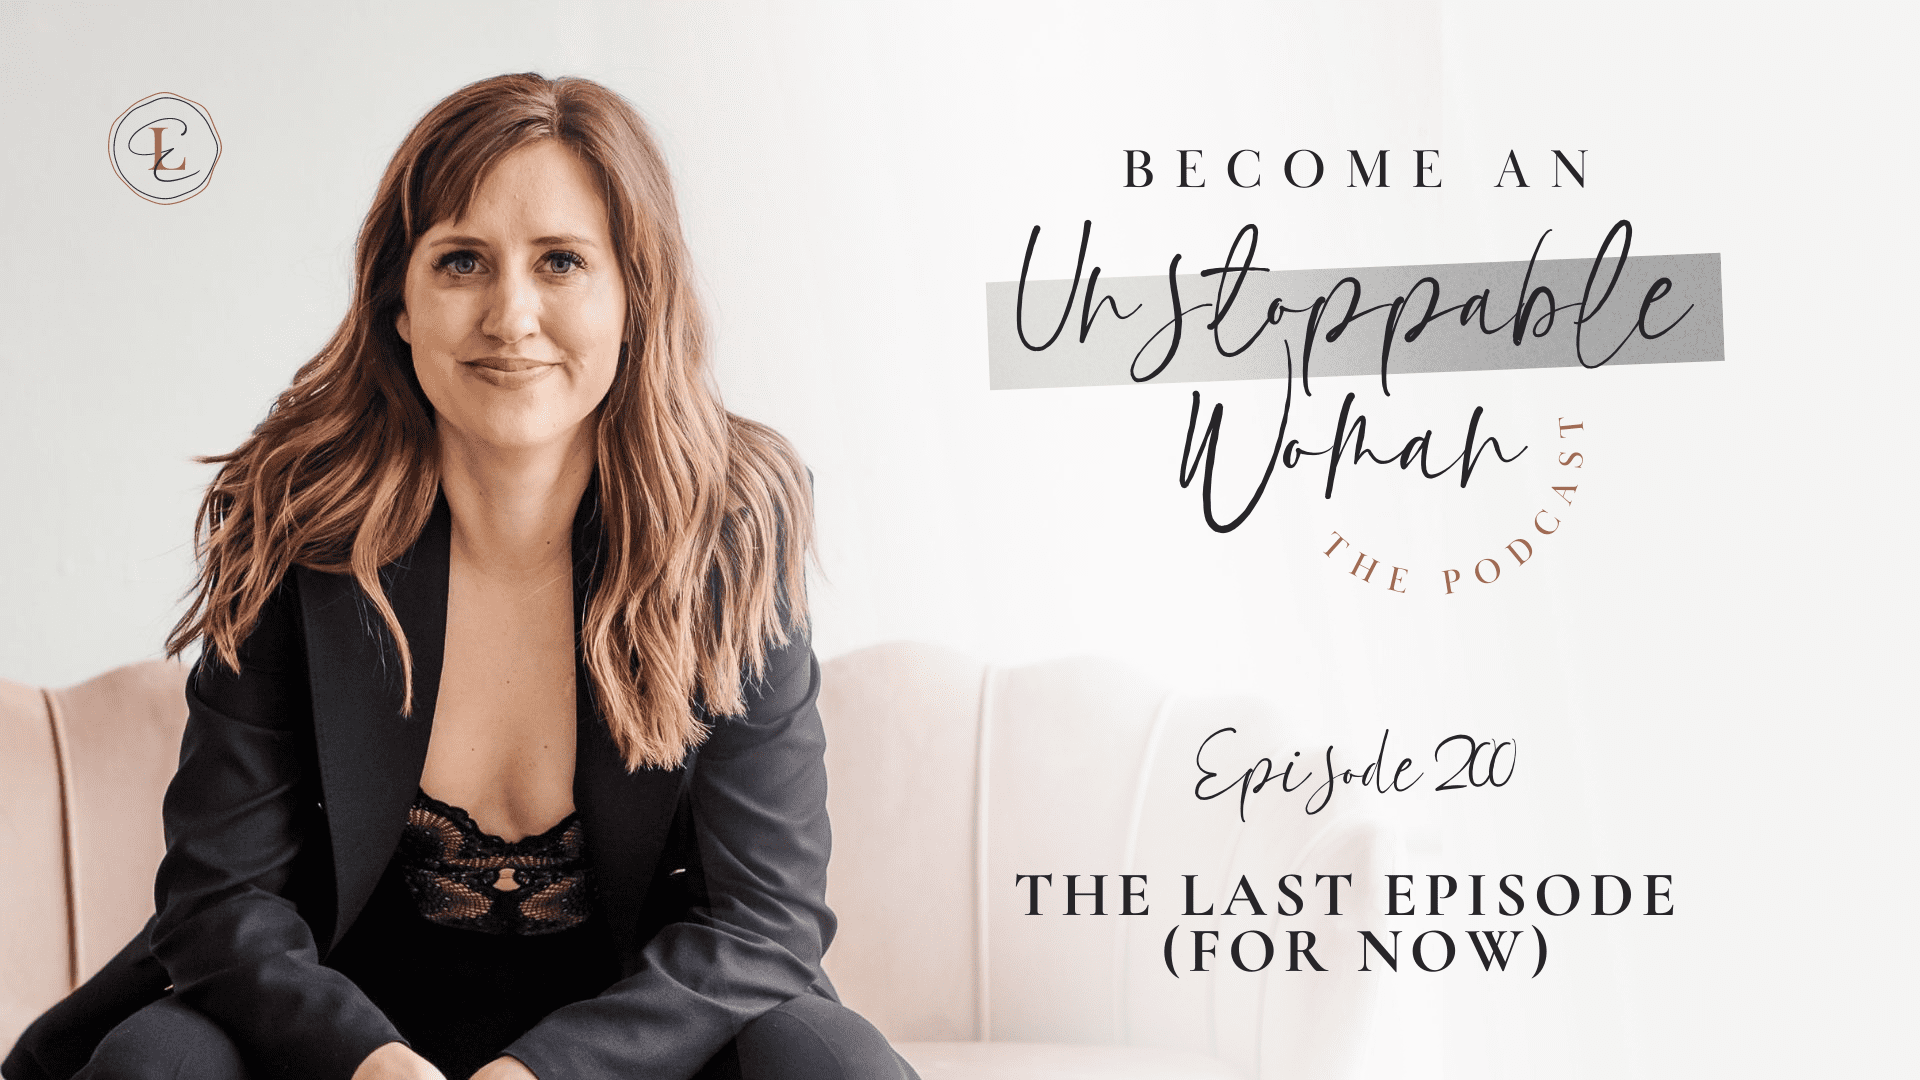 The final unstoppable woman episode